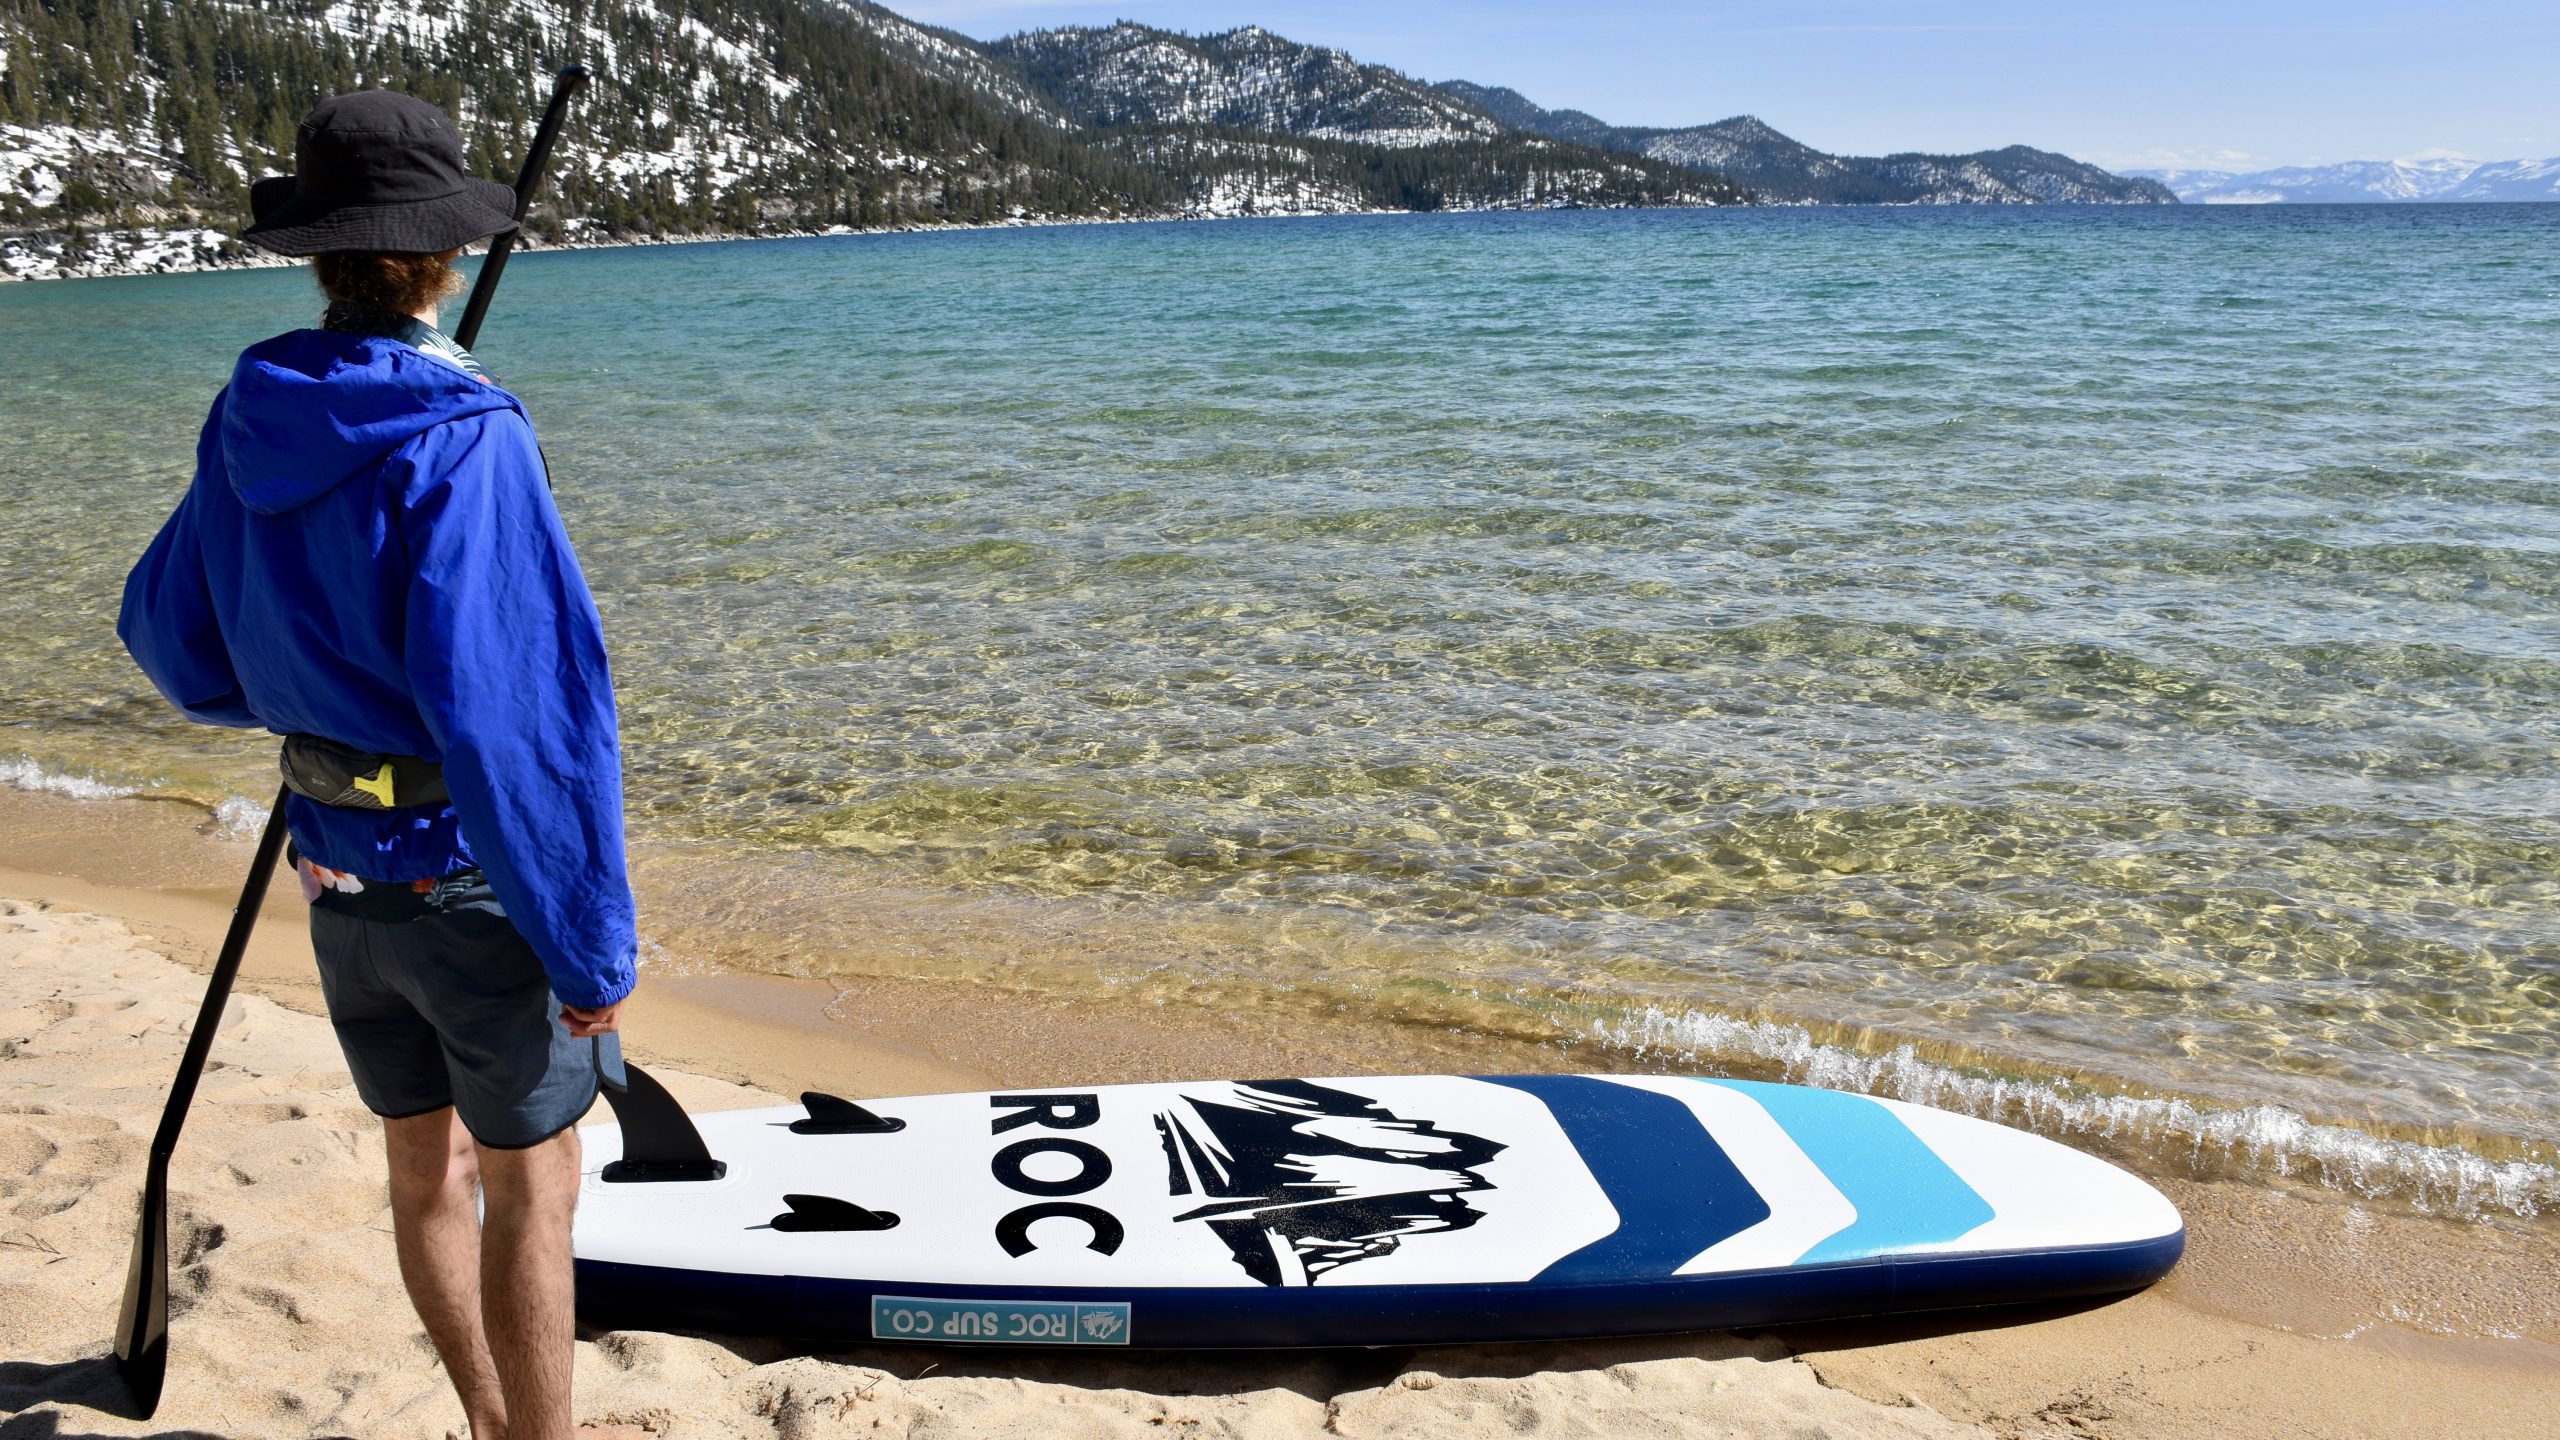 man preparing to paddle the roc kahuna inflatable paddle board on lake tahoe